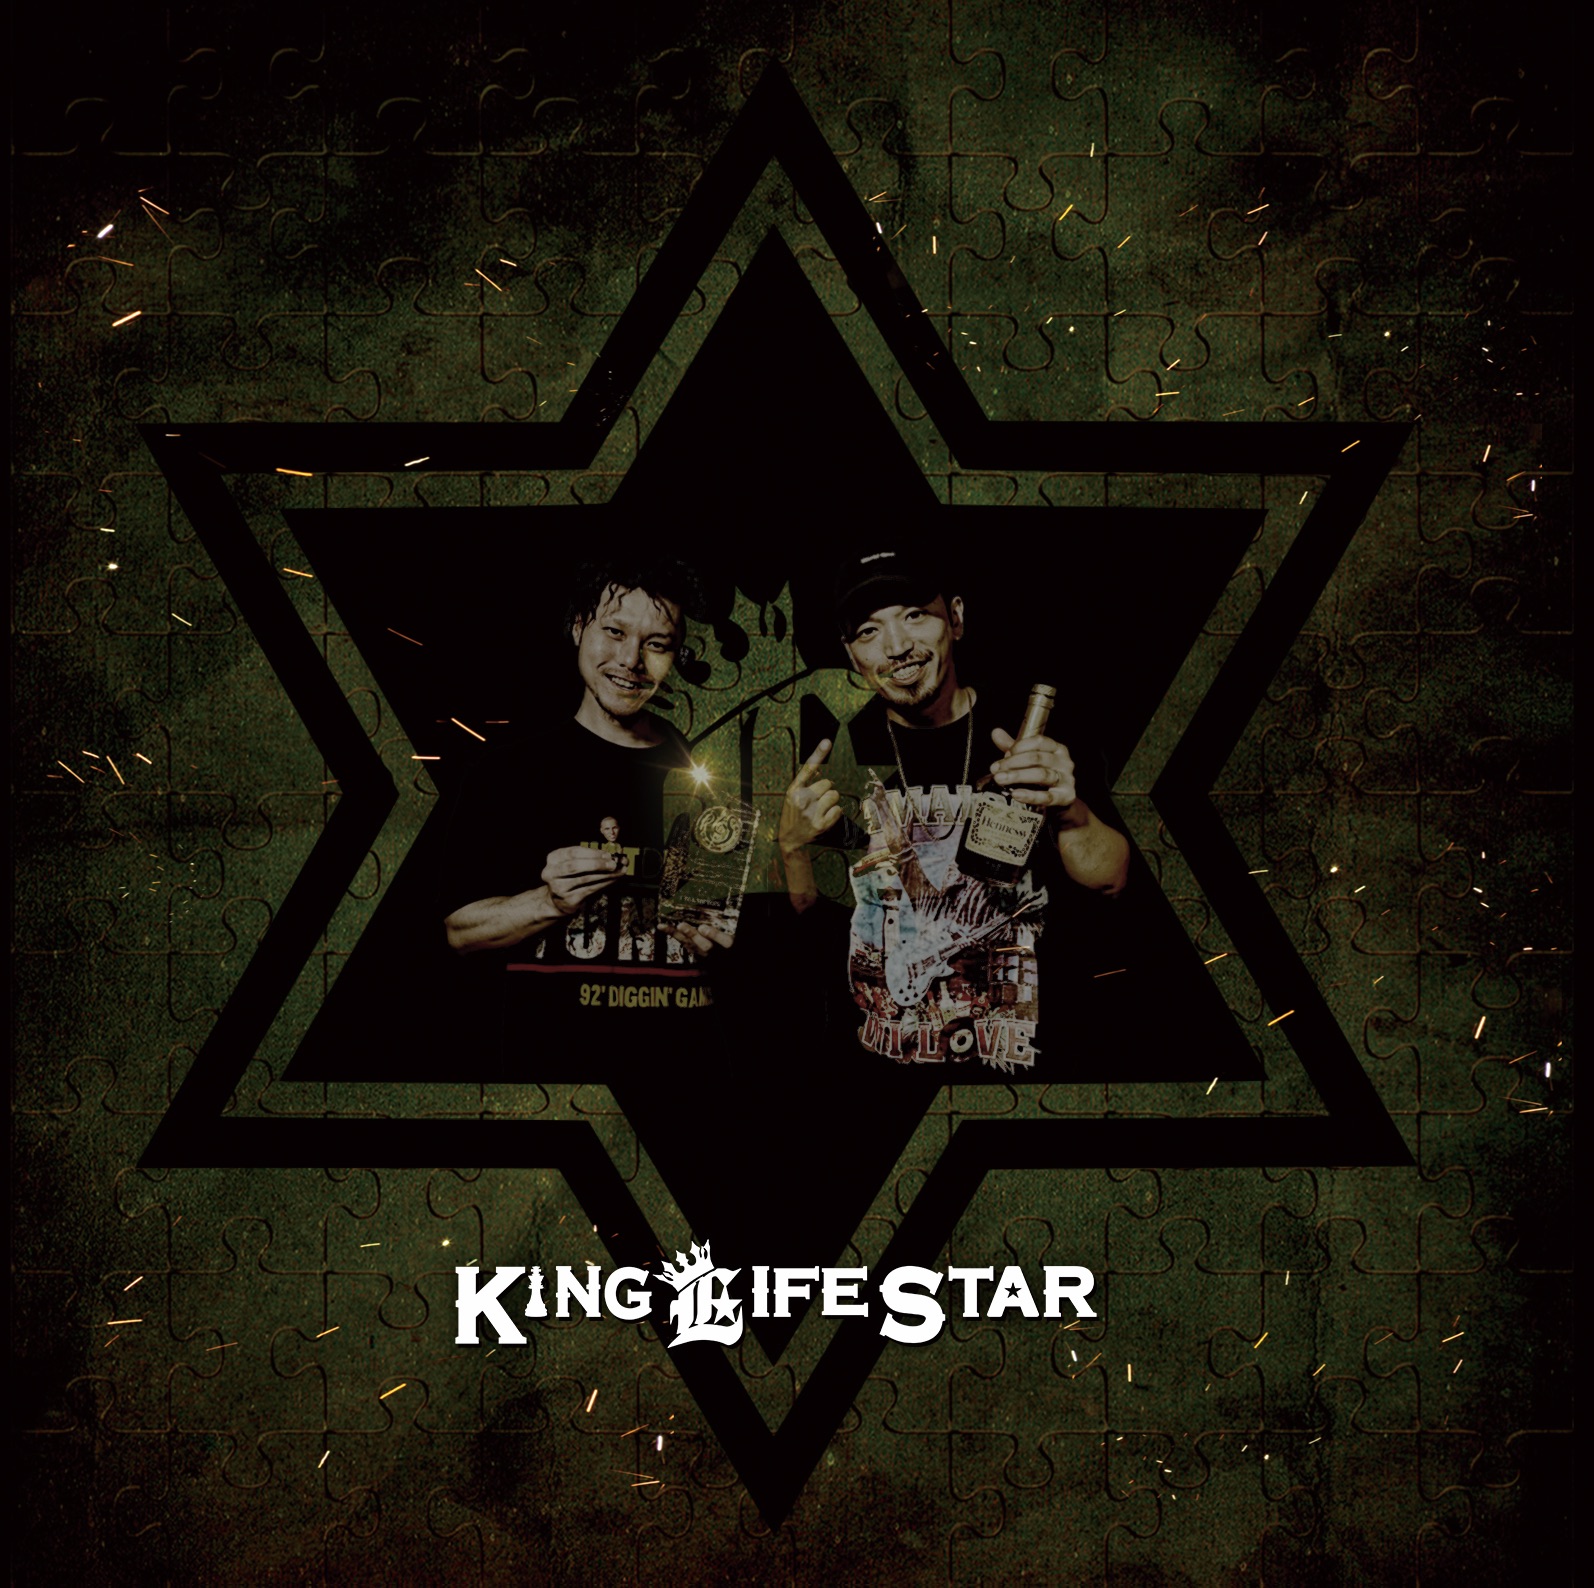 JUGGLIN PUZZLE LIVE～DO THE REGGAE ONLINE JUGGLIN CLASH KING LIFE STAR ROUND～